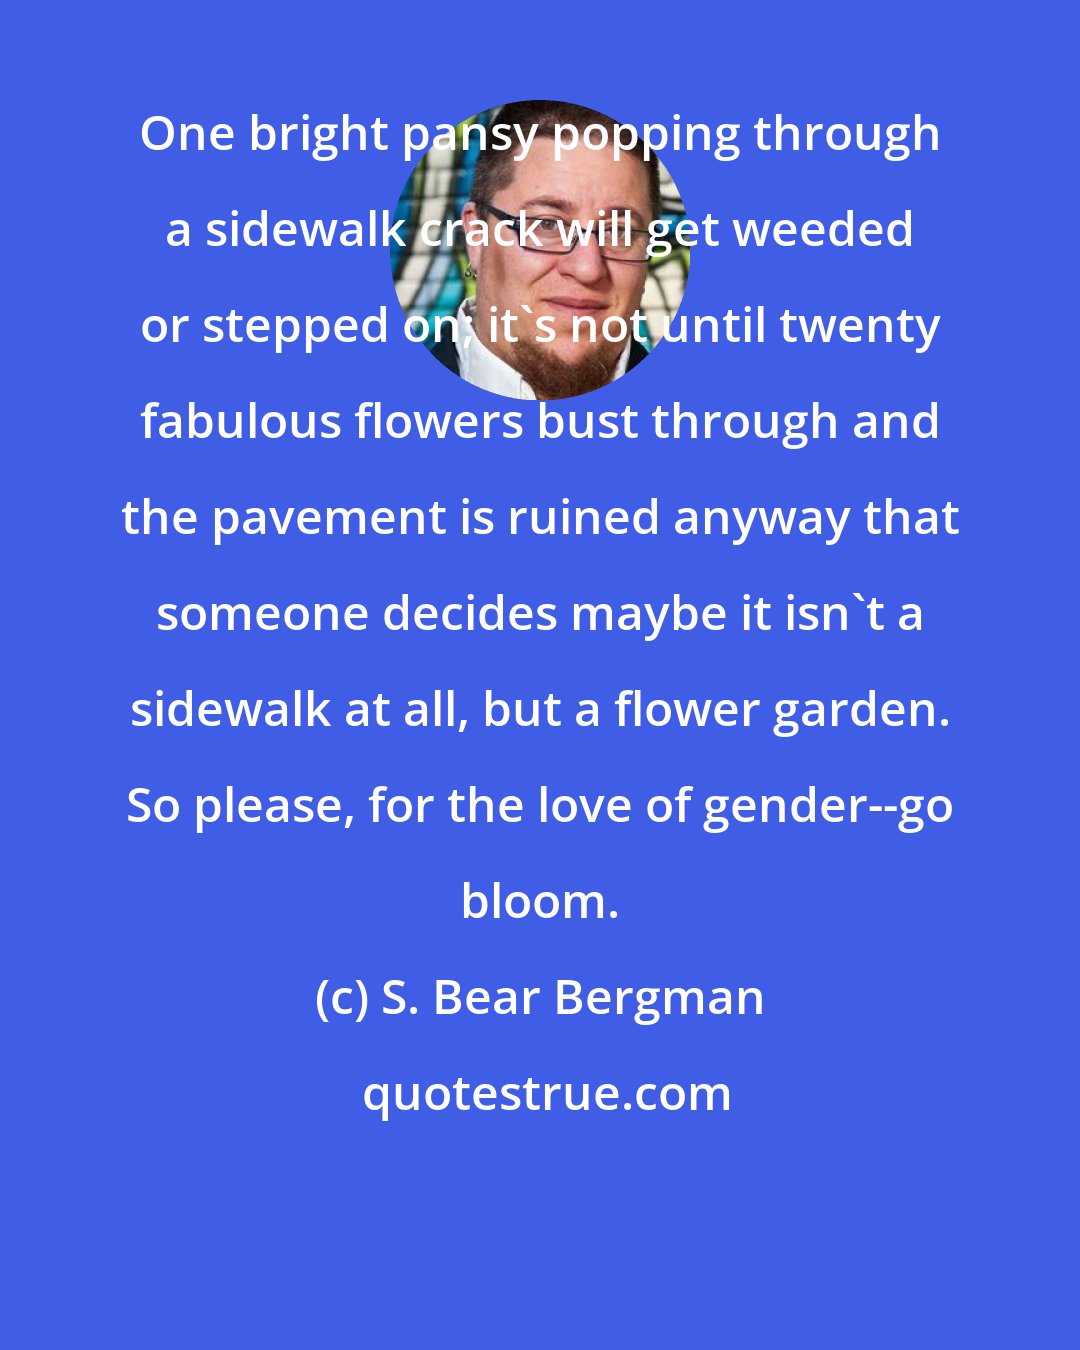 S. Bear Bergman: One bright pansy popping through a sidewalk crack will get weeded or stepped on; it's not until twenty fabulous flowers bust through and the pavement is ruined anyway that someone decides maybe it isn't a sidewalk at all, but a flower garden. So please, for the love of gender--go bloom.